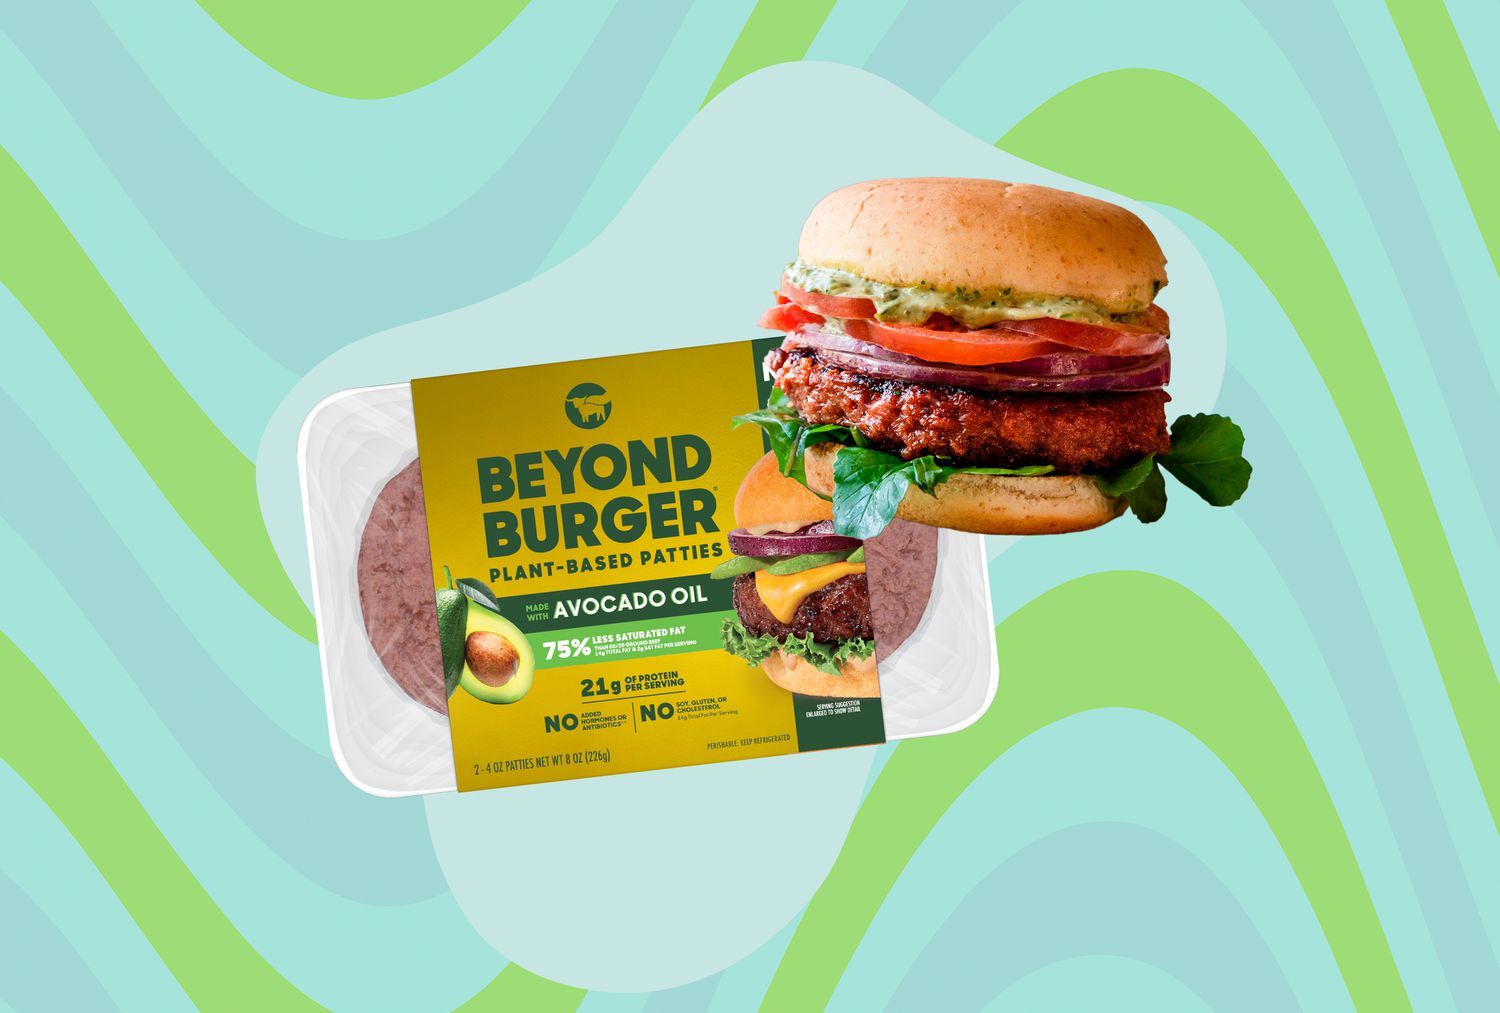 Beyond Meat Just Revamped Some of Their Products, But Are They Healthier? Here’s What a Dietitian Thinks